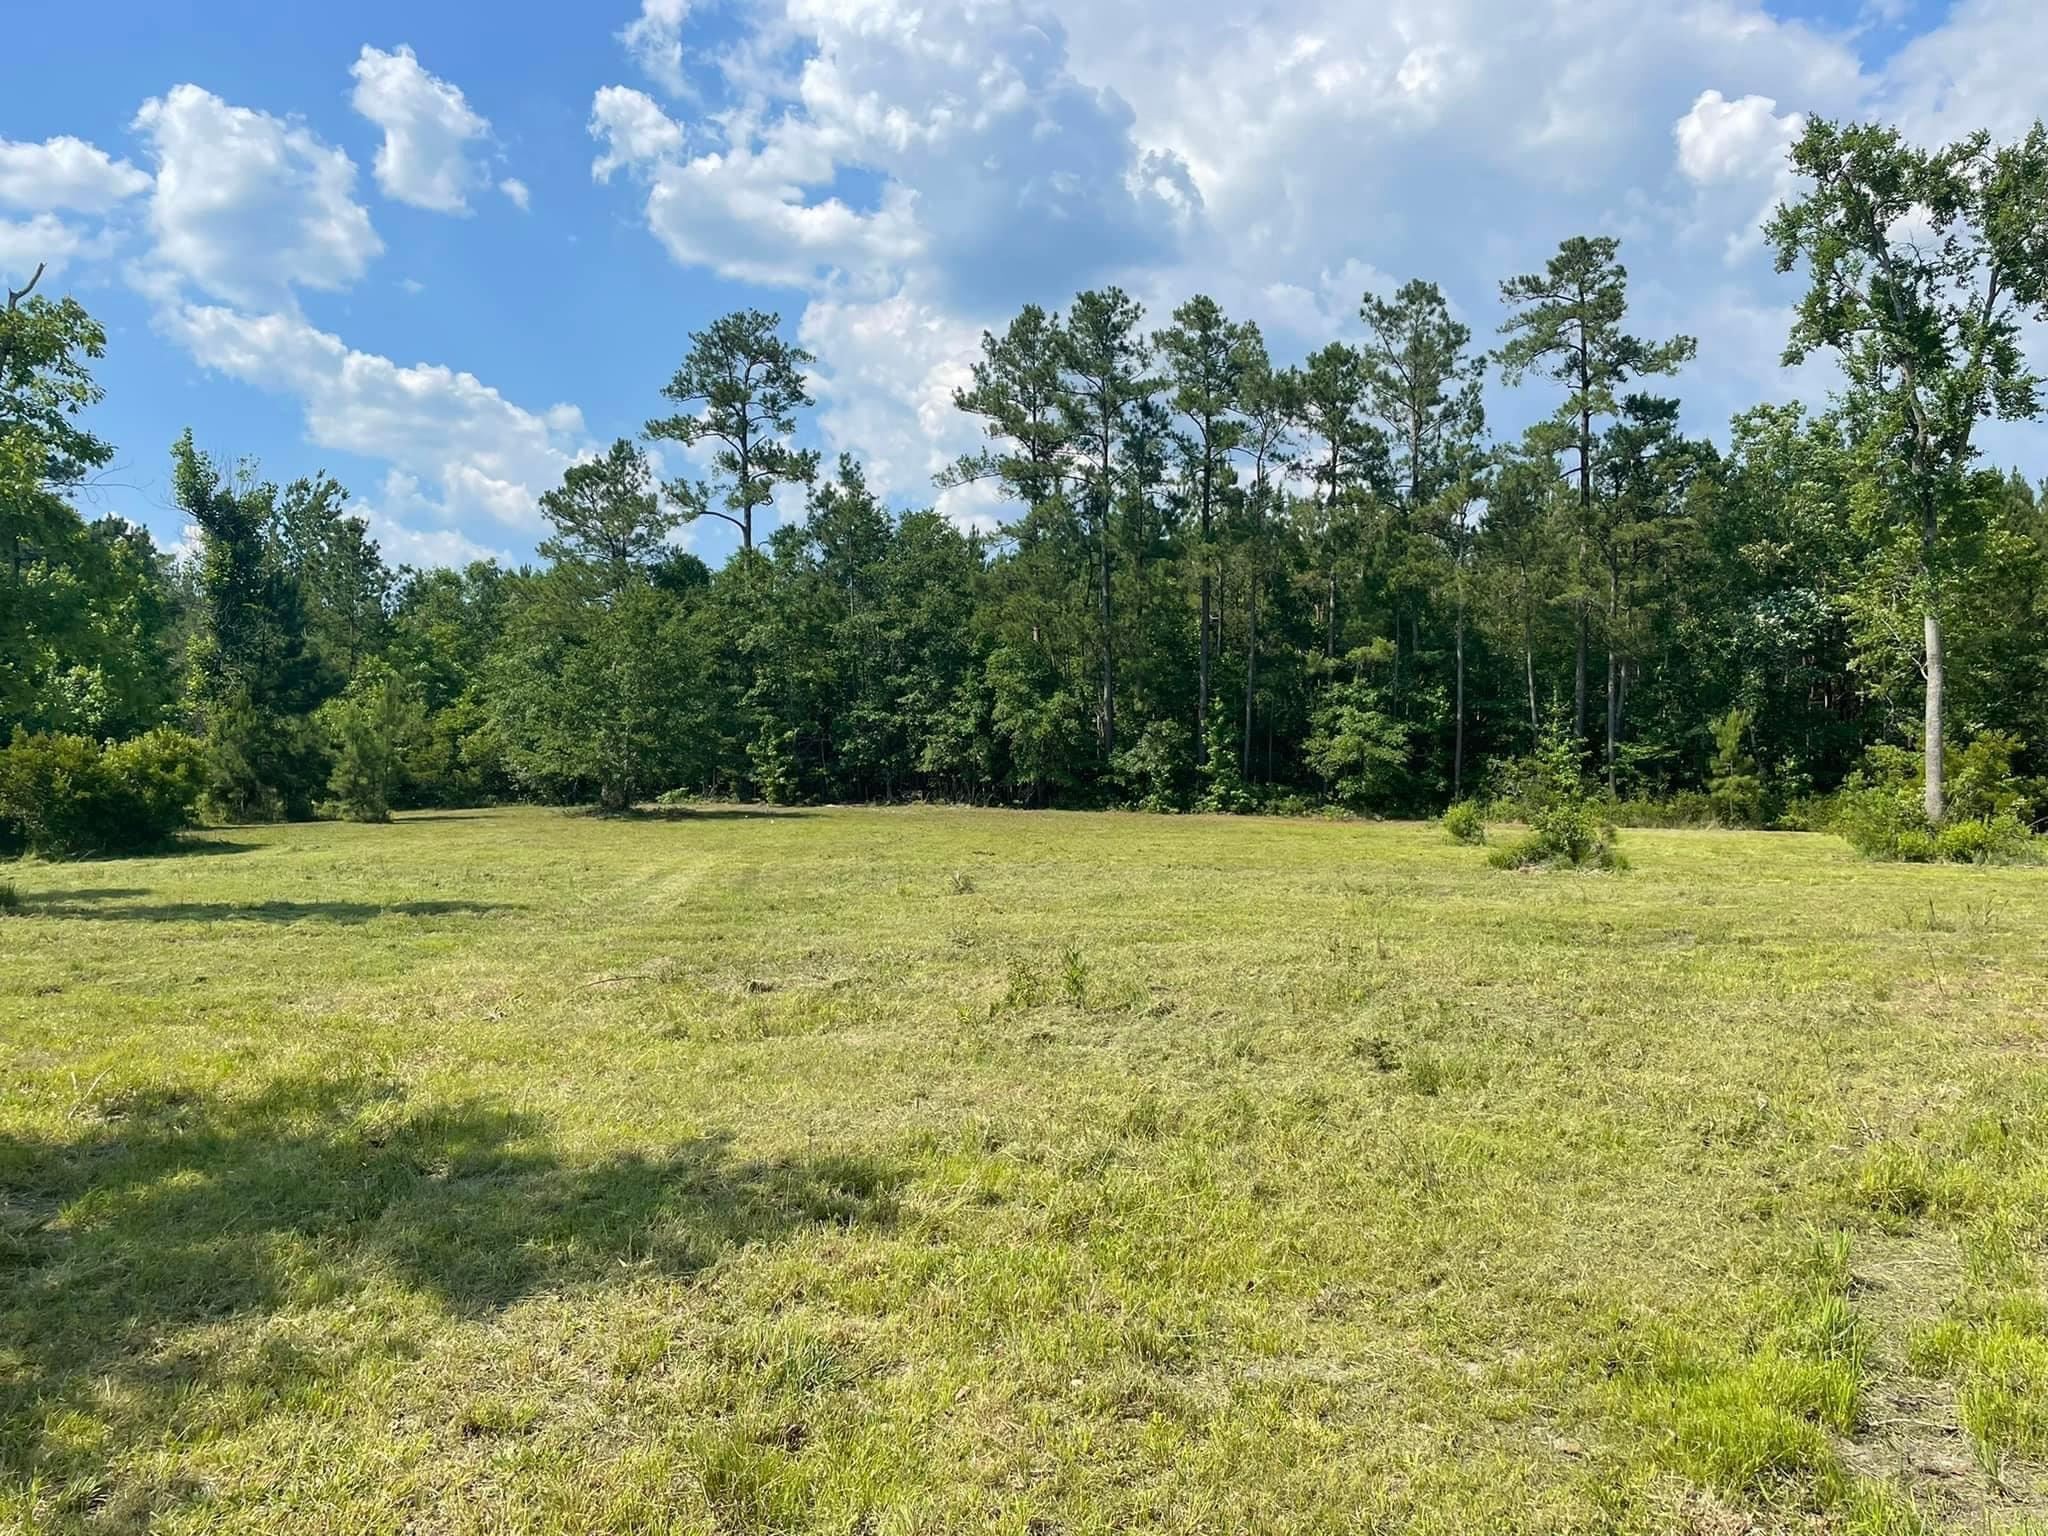 this one acre lot is located on paradise lane in elizabethtown. the lot is across the street from black river. this is a great spot for a home site or weekend place near black river. the nearest public access is browns ferry landing, approximately 10 minutes away. county water is not available and an engineered septic system will be required. seller is a licensed real estate agent.